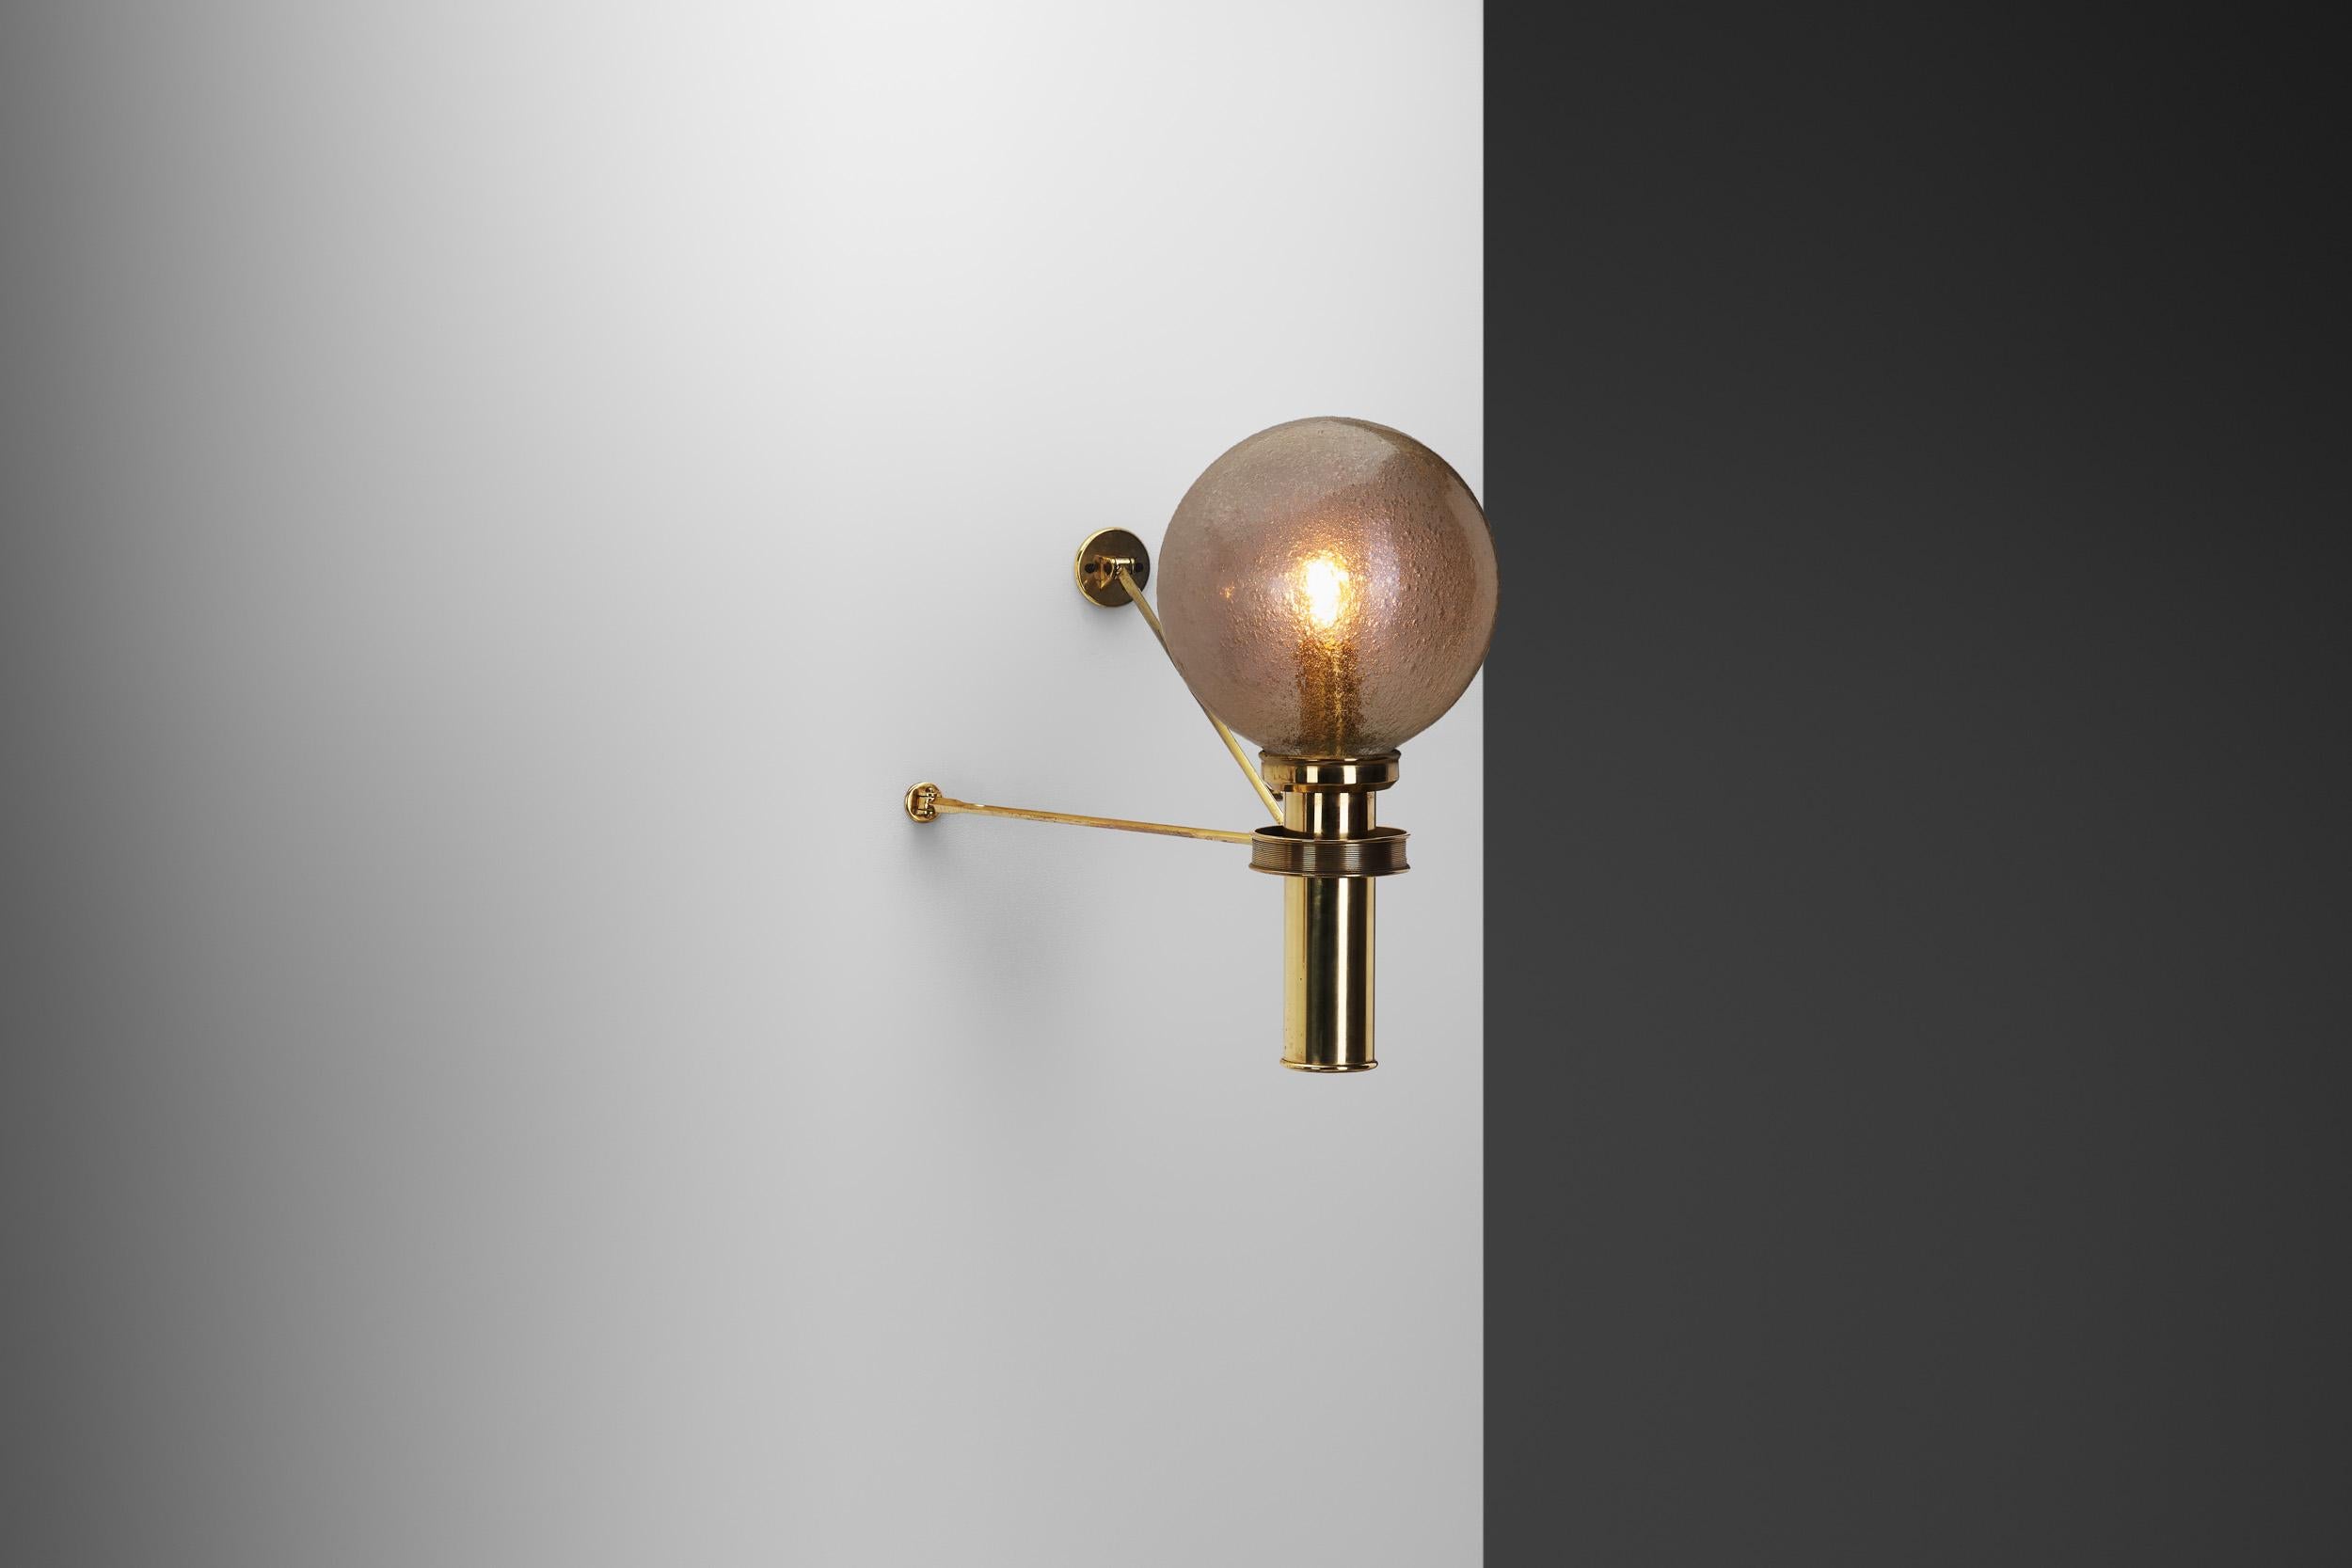 Mid-Century Modern Large European Modern Wall Sconce in Brass & Bubble Glass, Europe circa 1950s For Sale